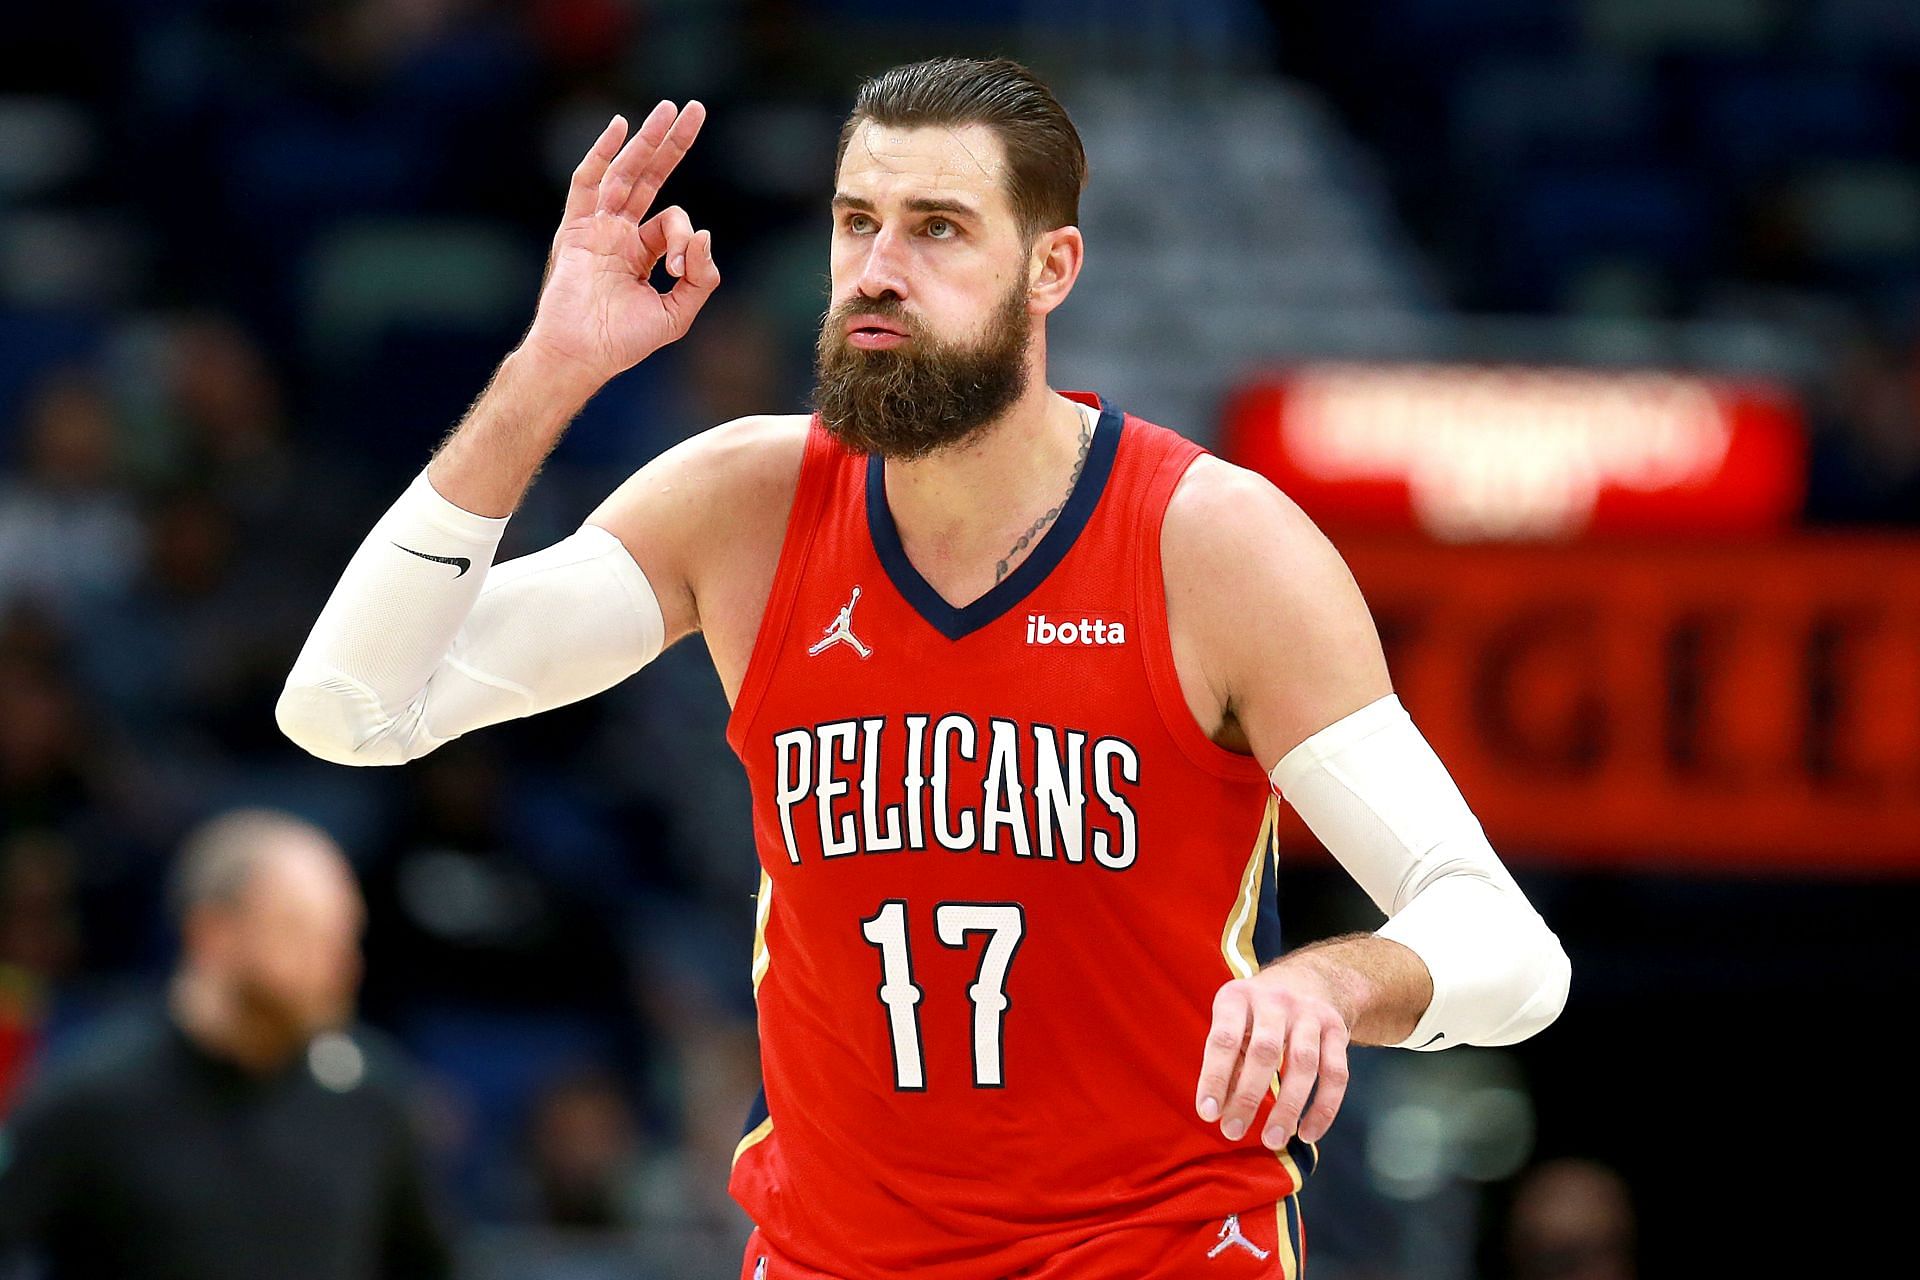 Jonas Valanciunas has been the most consistent player for New Orleans Pelicans so far.